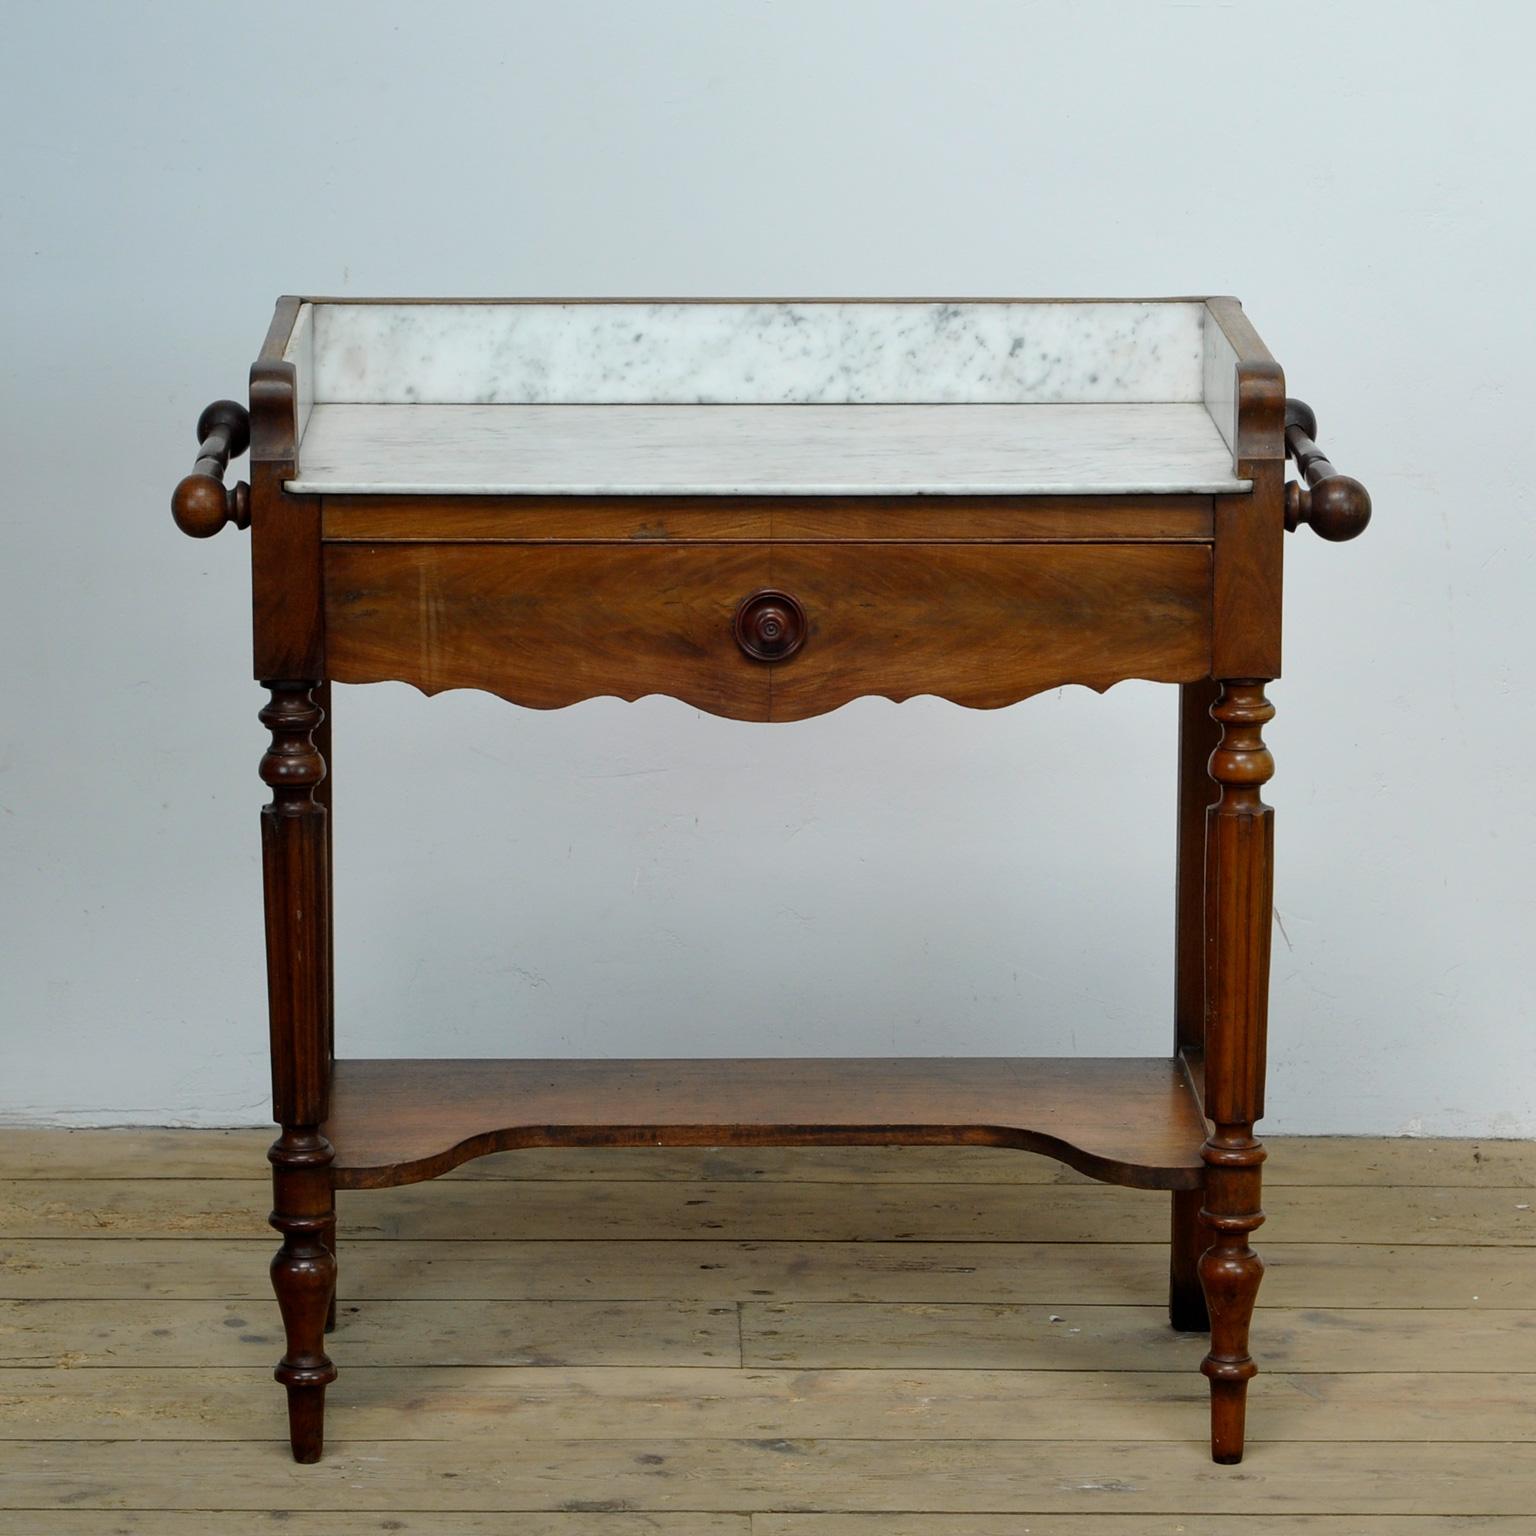 Antique French oak dressing table with marble top with a drawer underneath. A rod on the sides to hang a towel.
The table was made around 1920. 